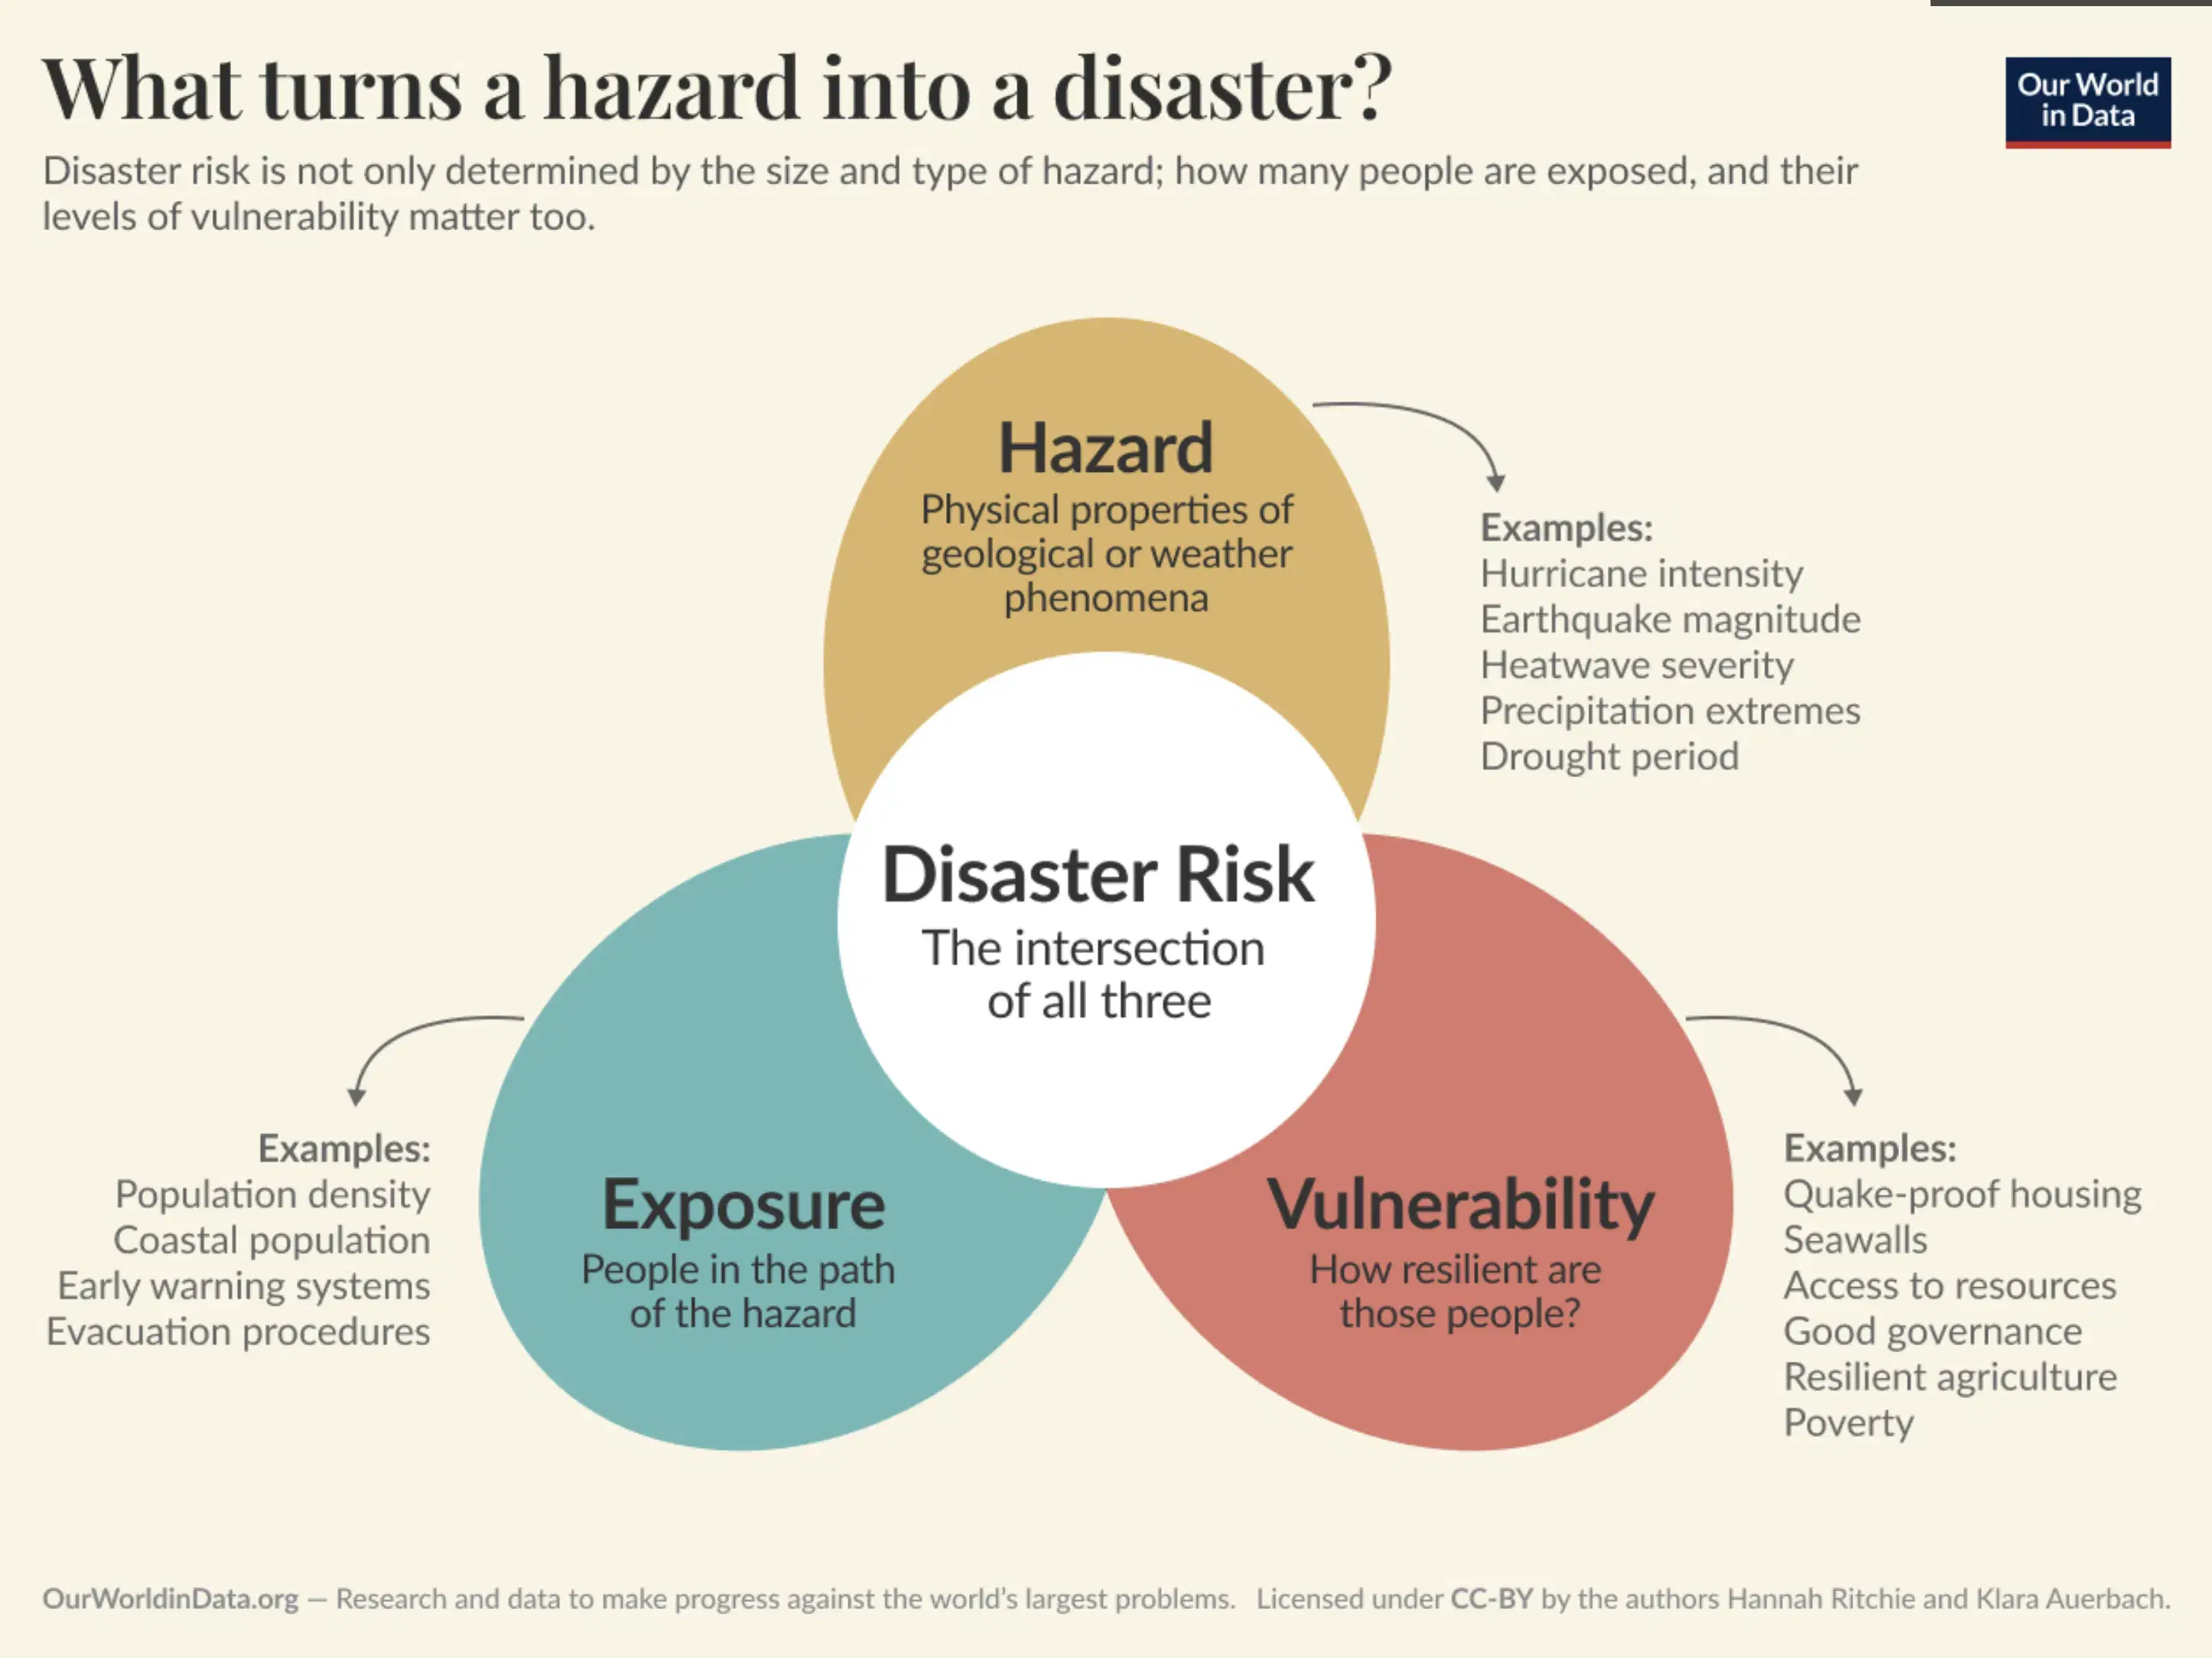 What Turns a Hazard into a Disaster